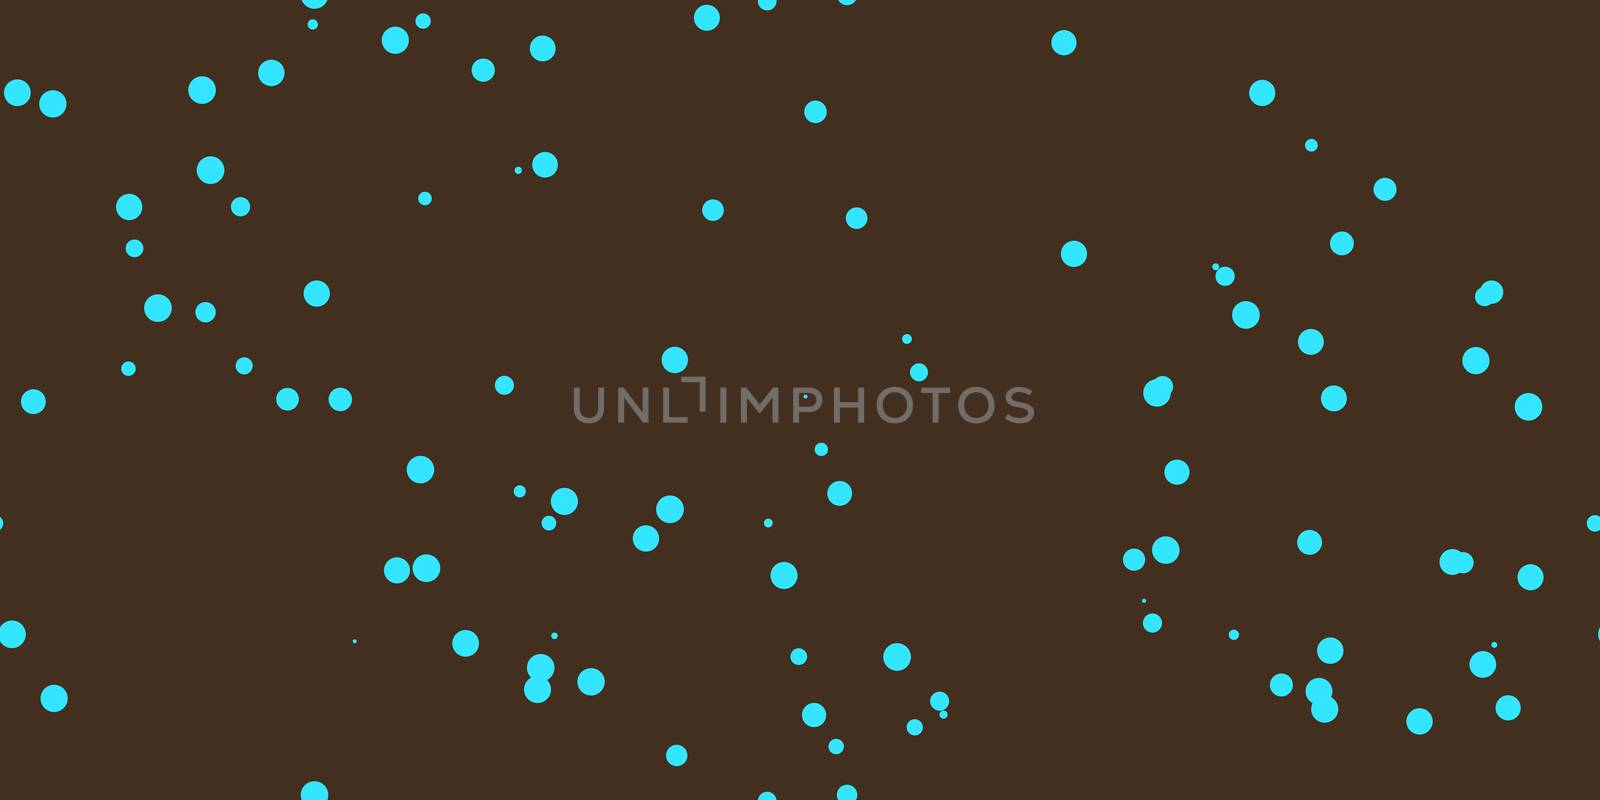 Brown Turquoise Shambolic Bubbles Backgrounds. Seamless Artistic Random Dots Texture. Chaotic Bright Dots Backdrop.